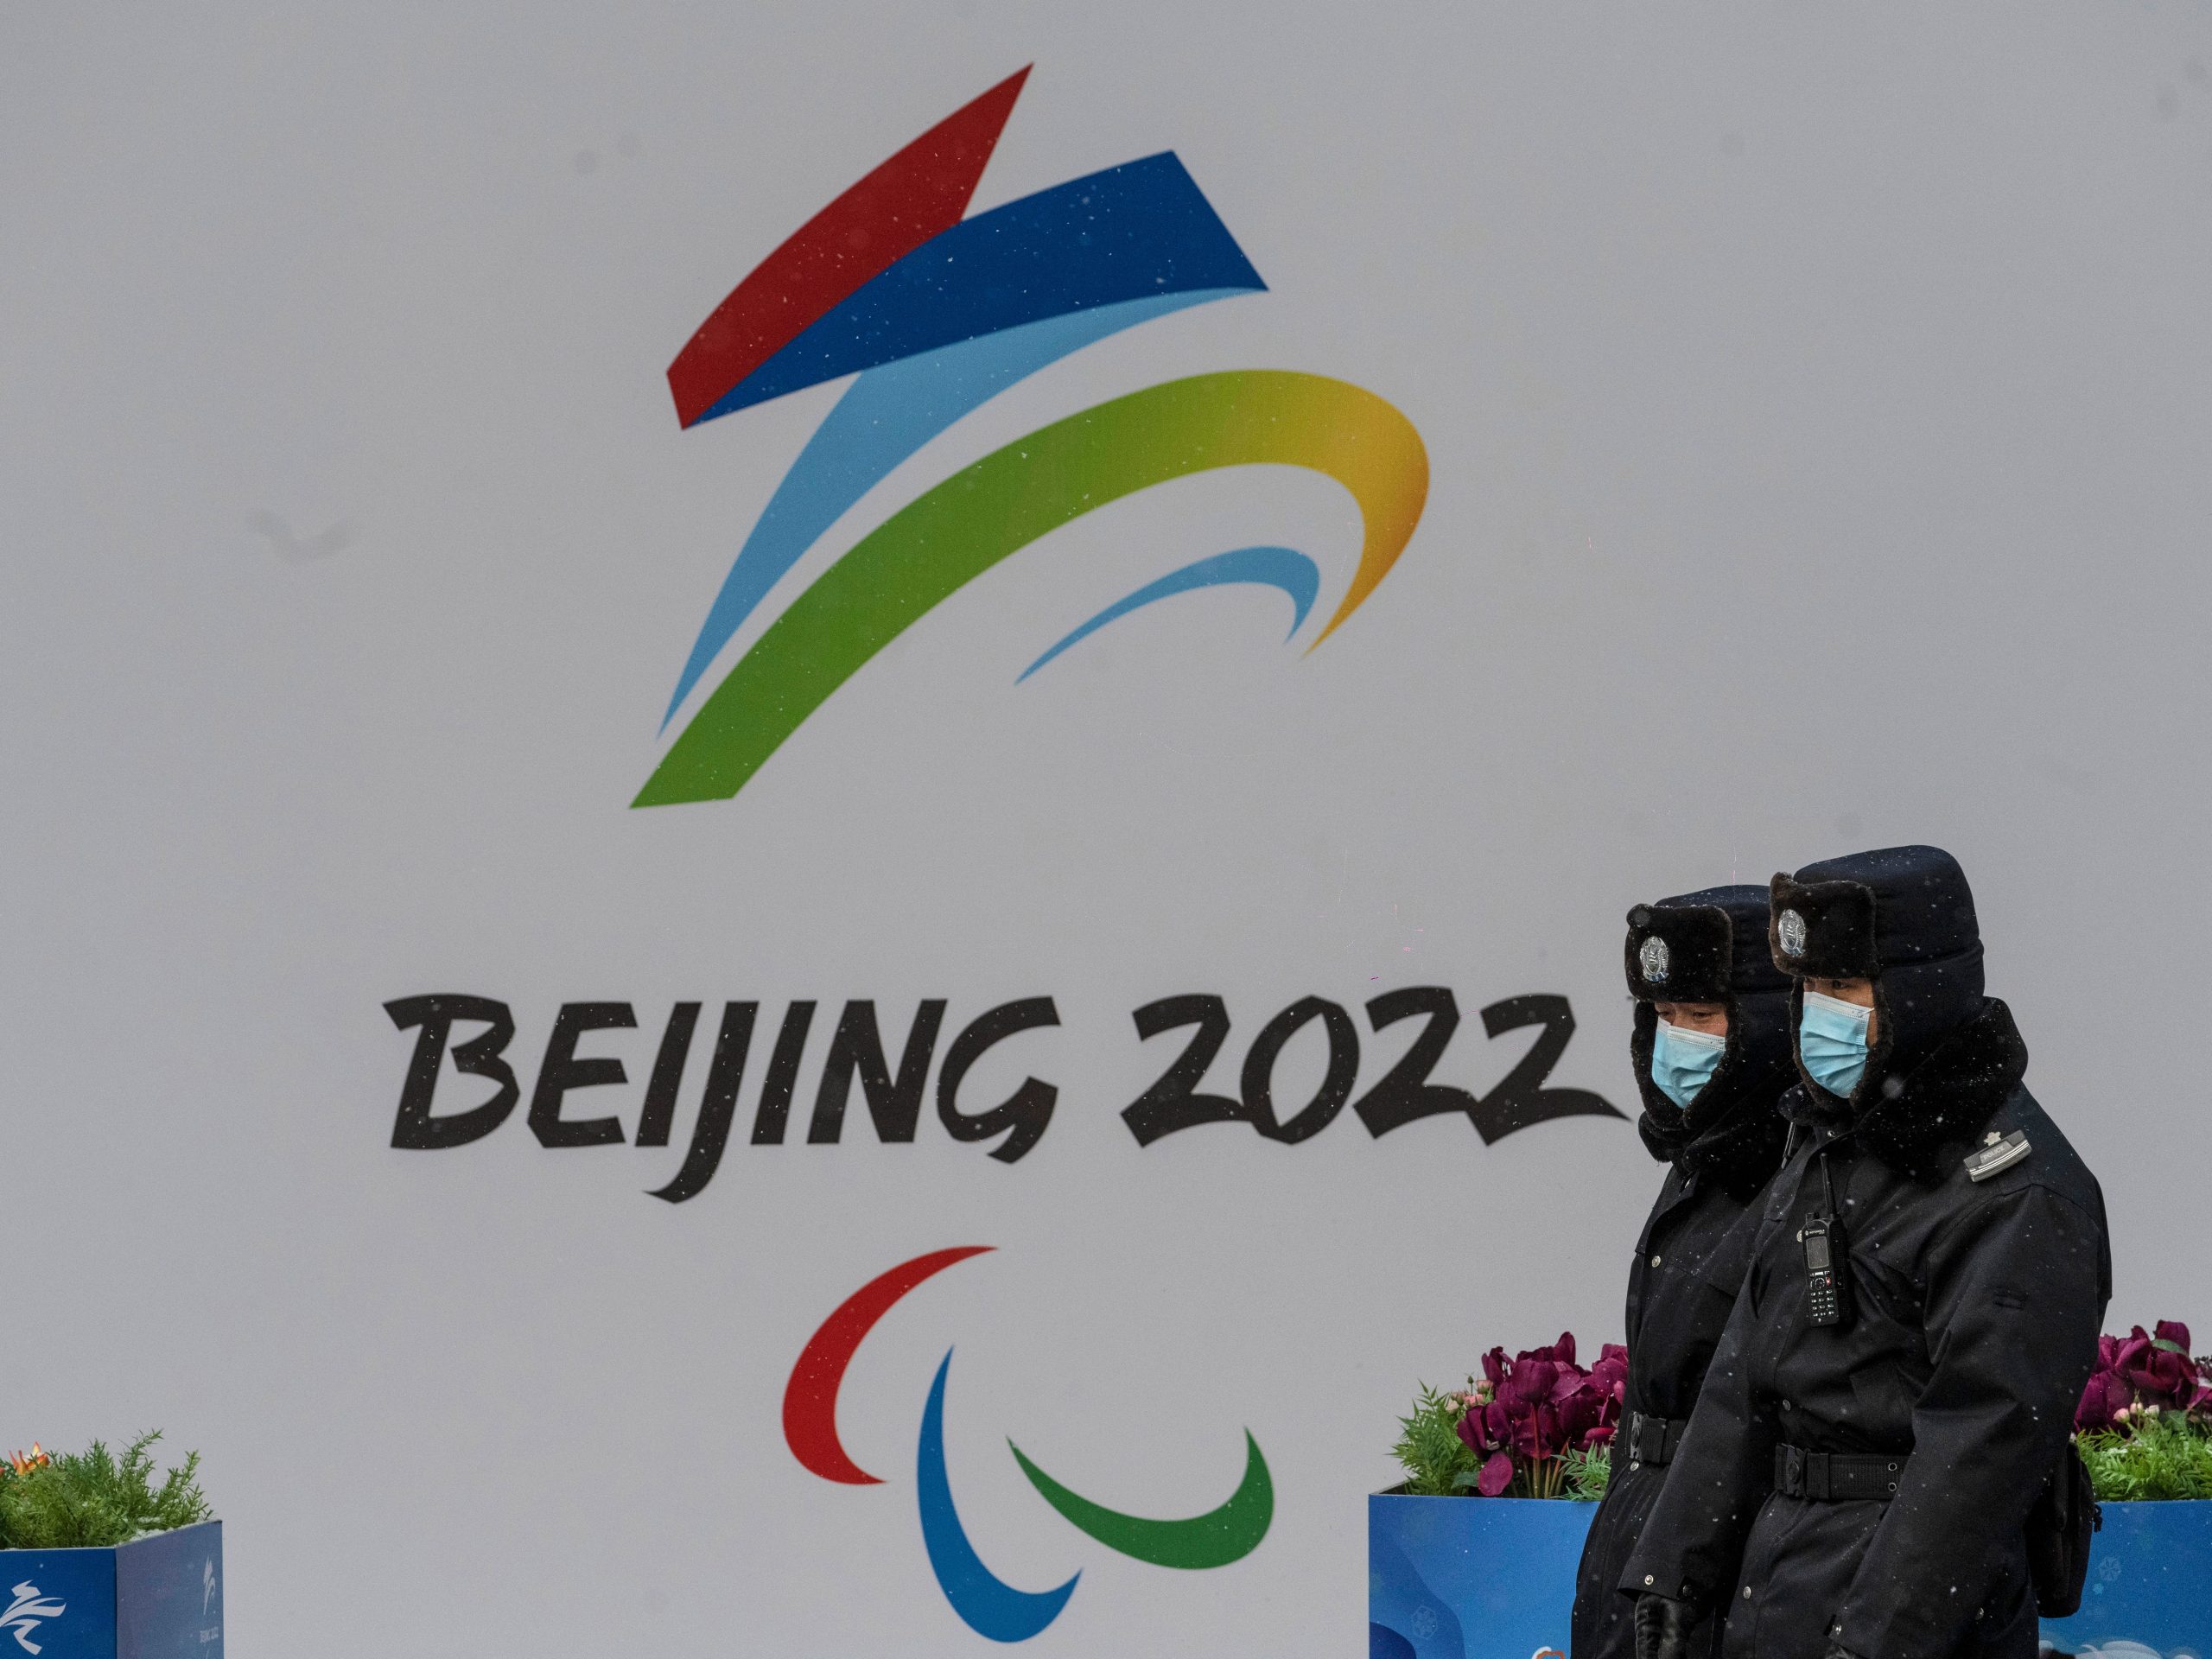 Security walk by a billboard for the Beijing 2022 Winter Olympics and Paralympics during a snowfall on January 20, 2022 in Beijing, China.